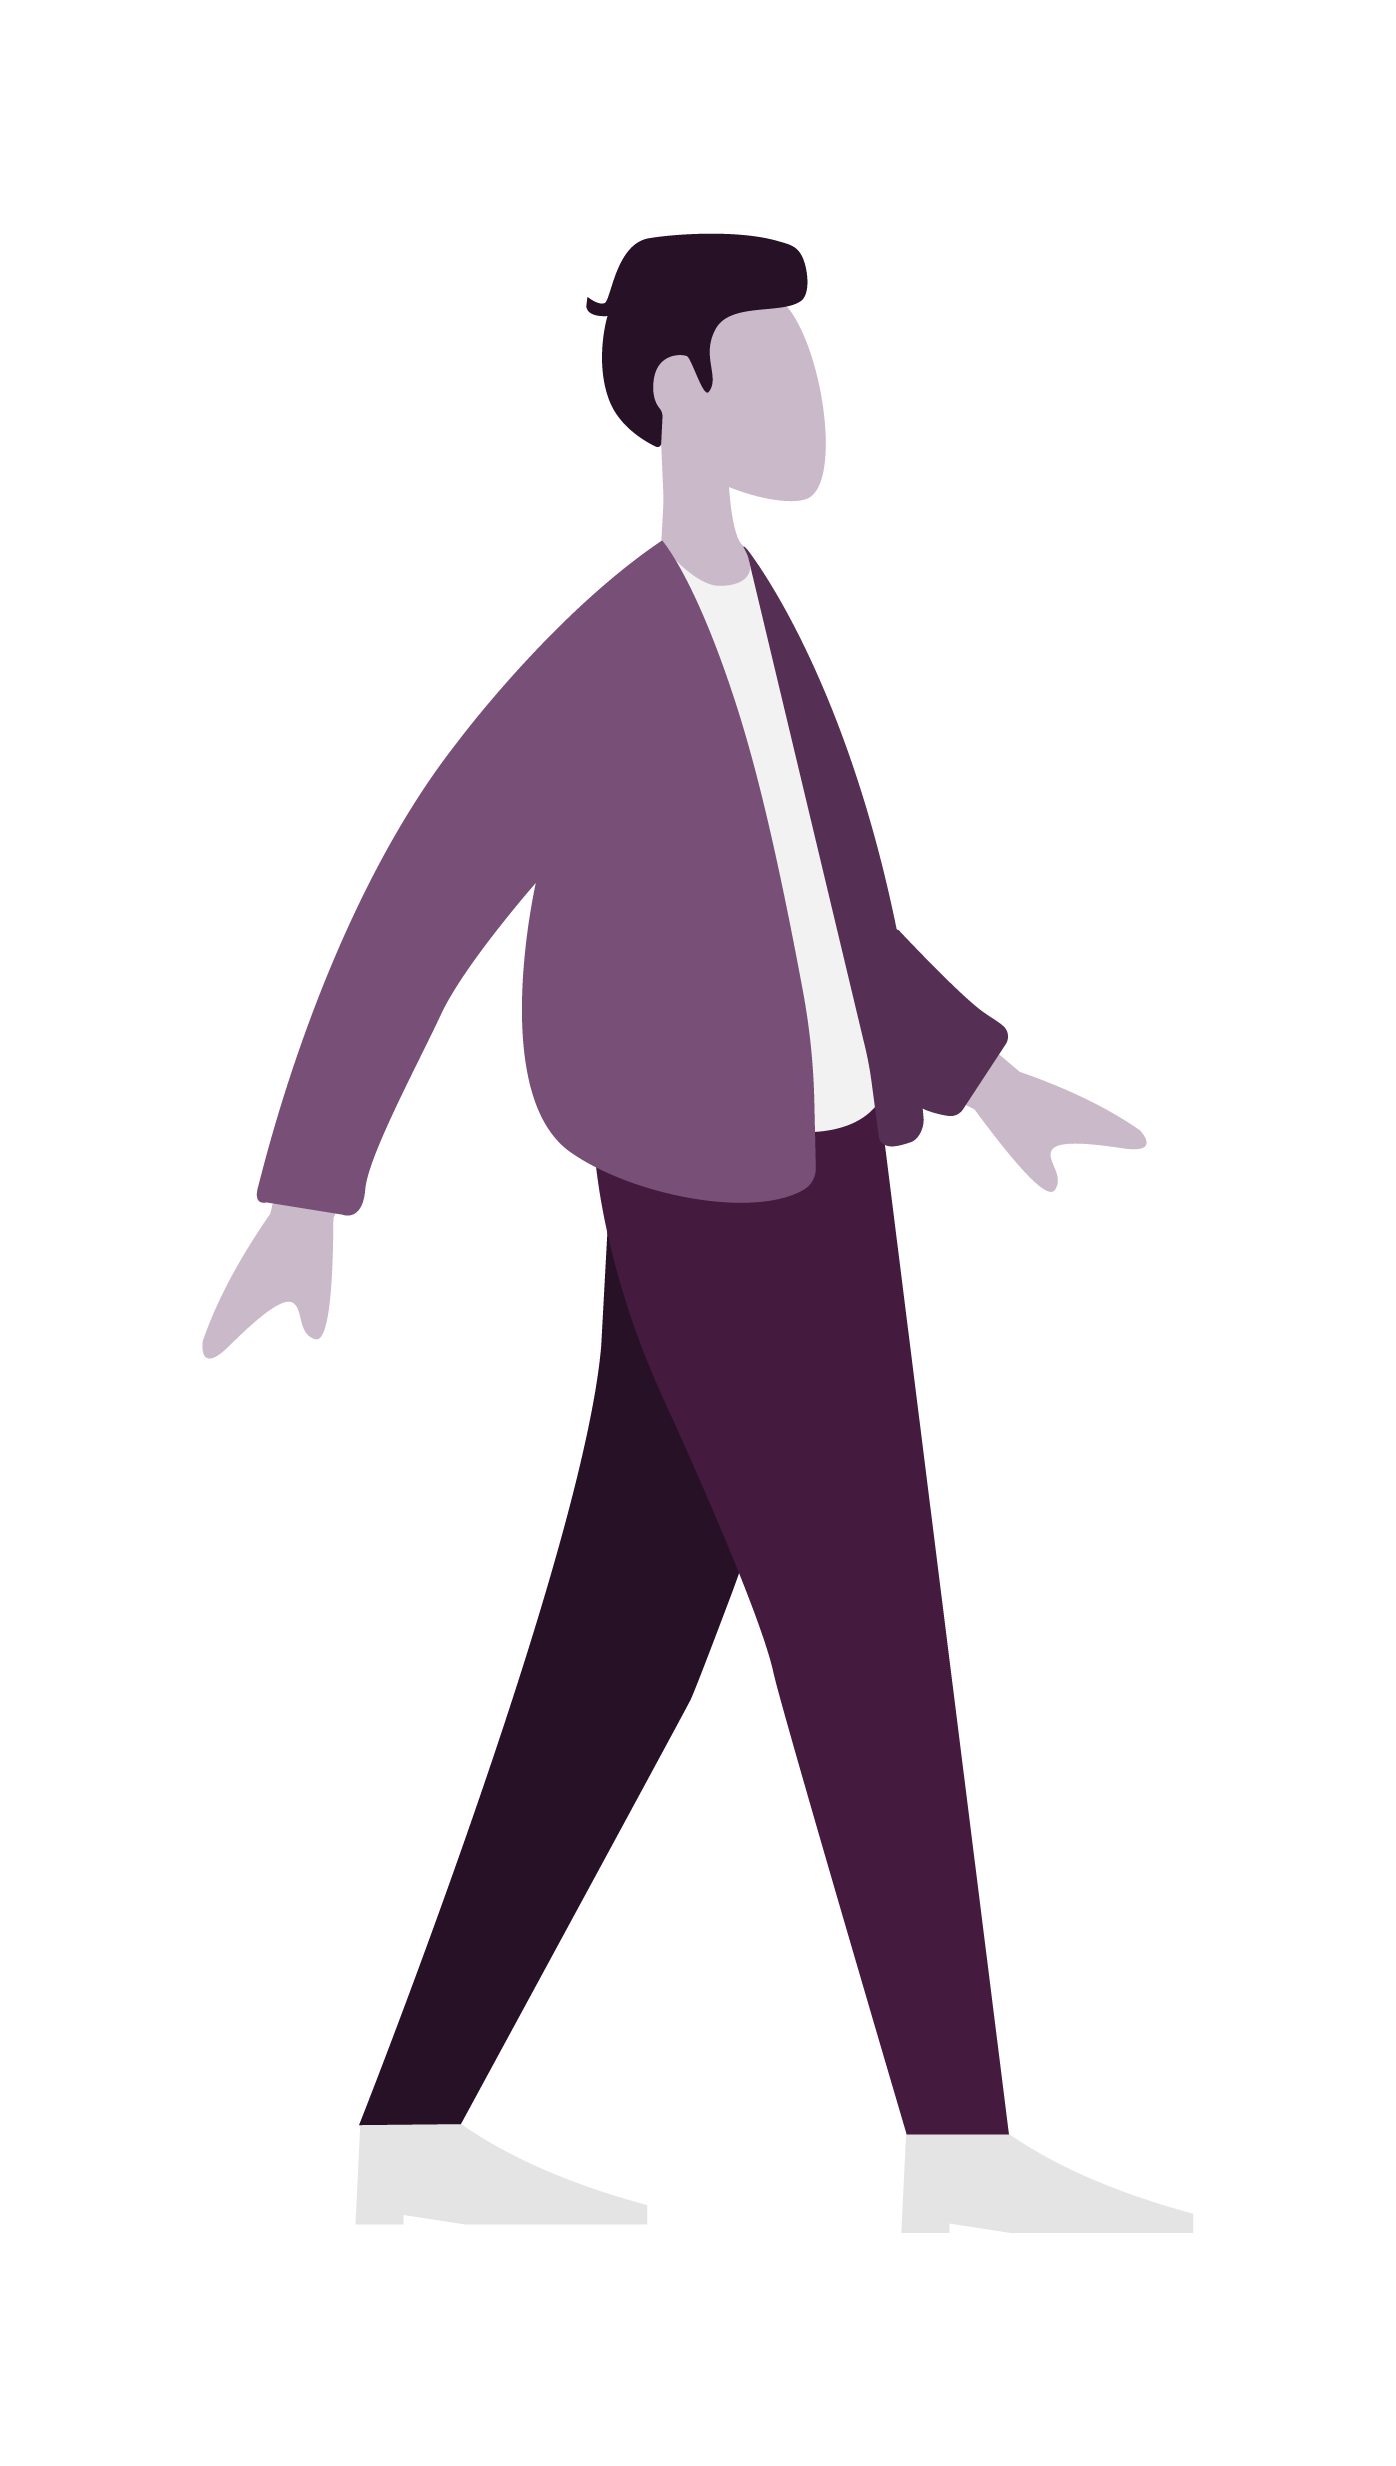 Male illustration walking forward with right foot leading